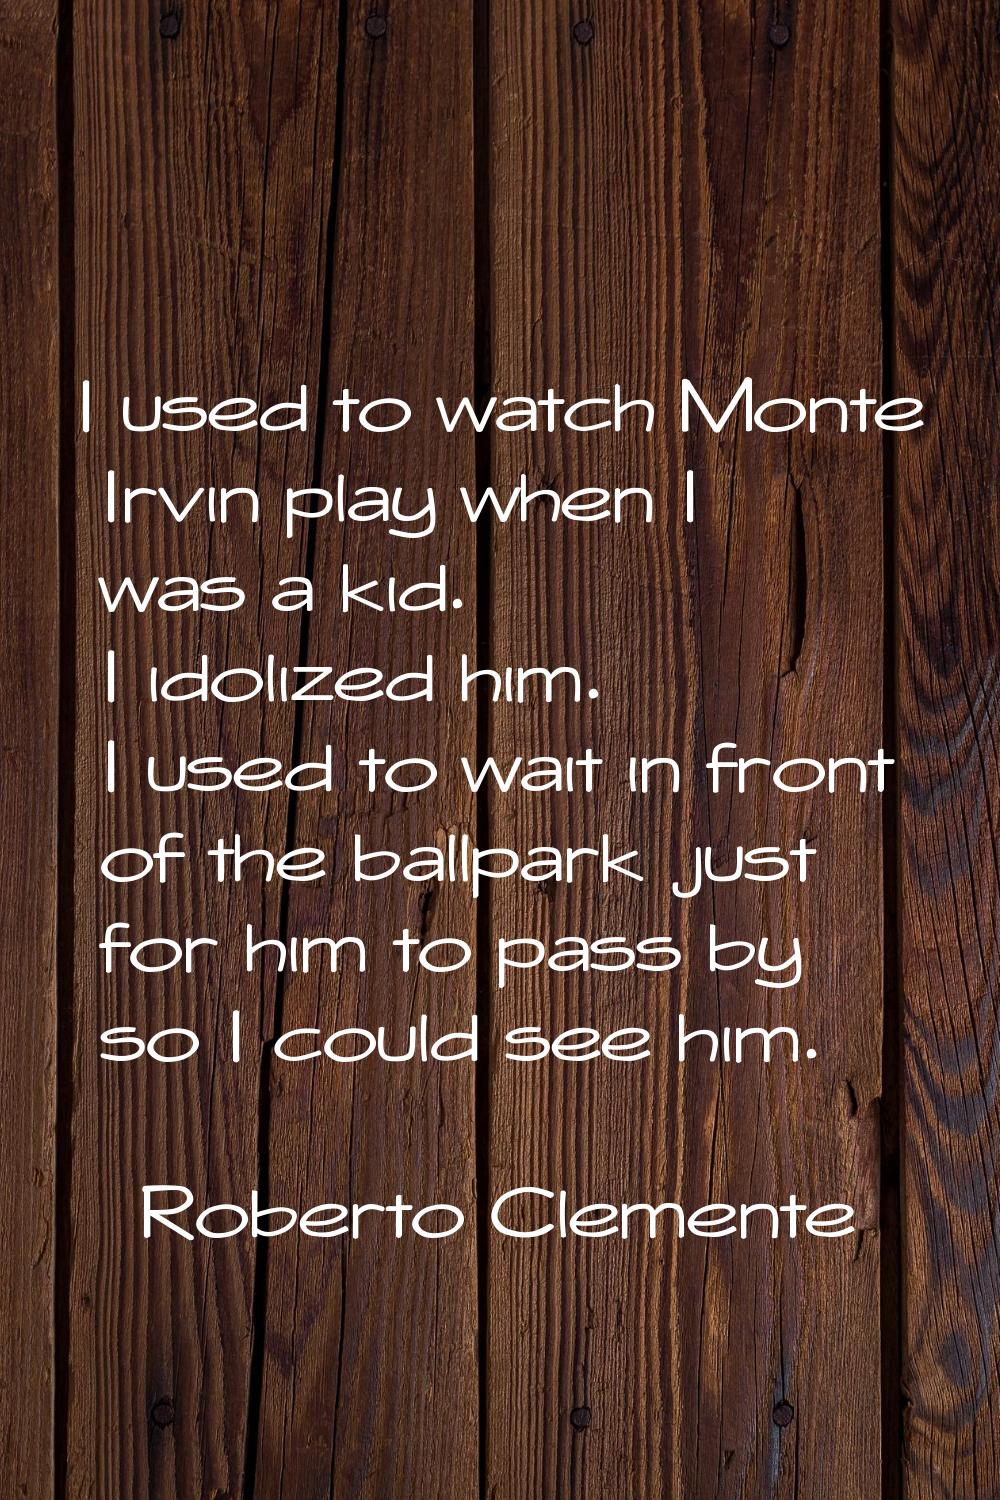 I used to watch Monte Irvin play when I was a kid. I idolized him. I used to wait in front of the b